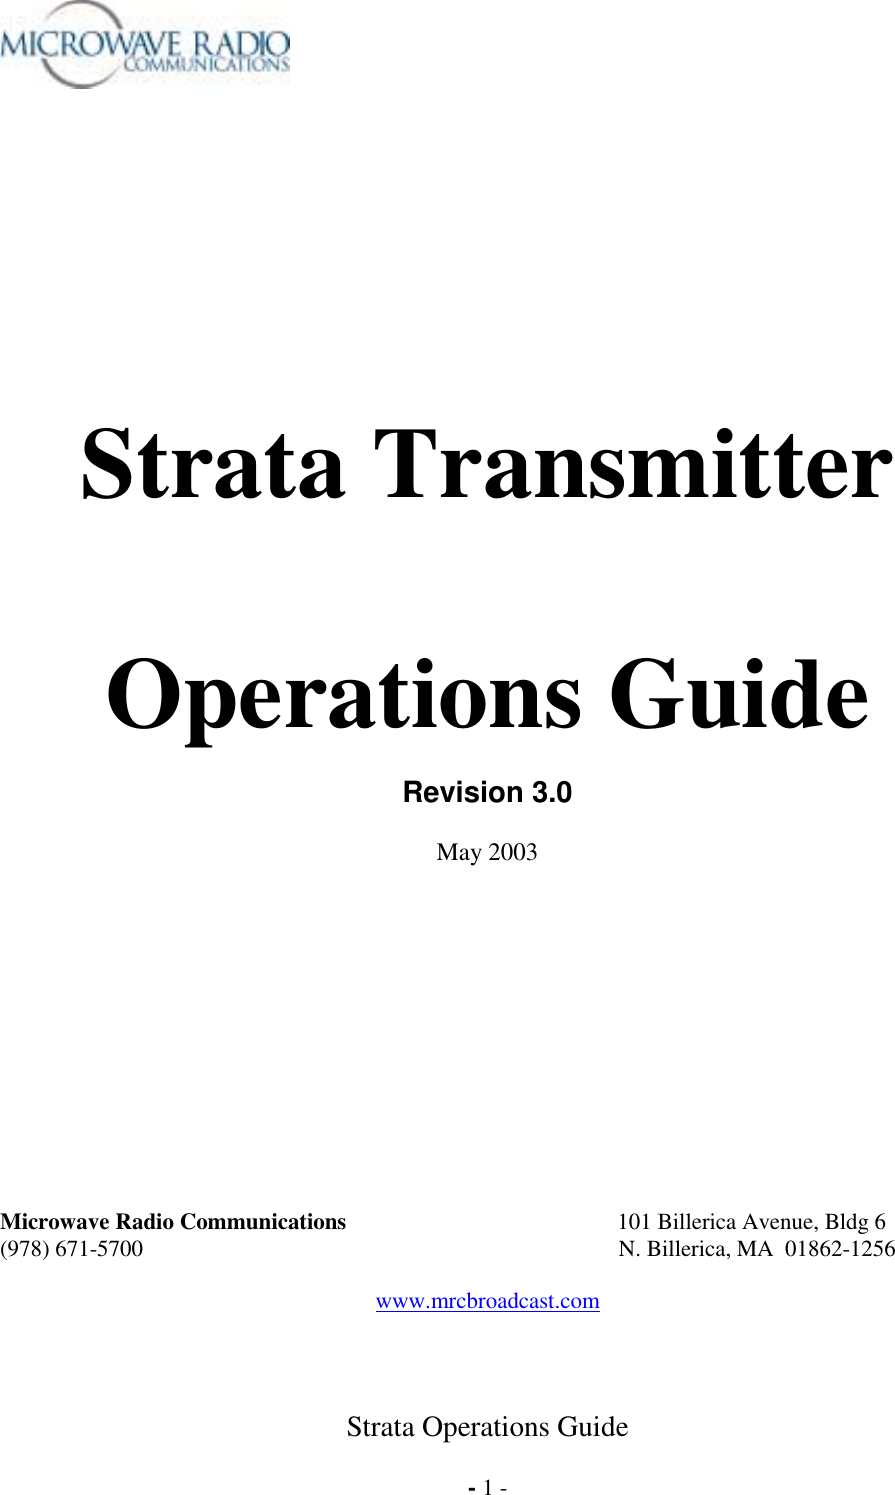  Strata Operations Guide  - 1 -             Strata Transmitter  Operations Guide       Revision 3.0  May 2003              Microwave Radio Communications           101 Billerica Avenue, Bldg 6 (978) 671-5700                                                                                   N. Billerica, MA  01862-1256  www.mrcbroadcast.com    